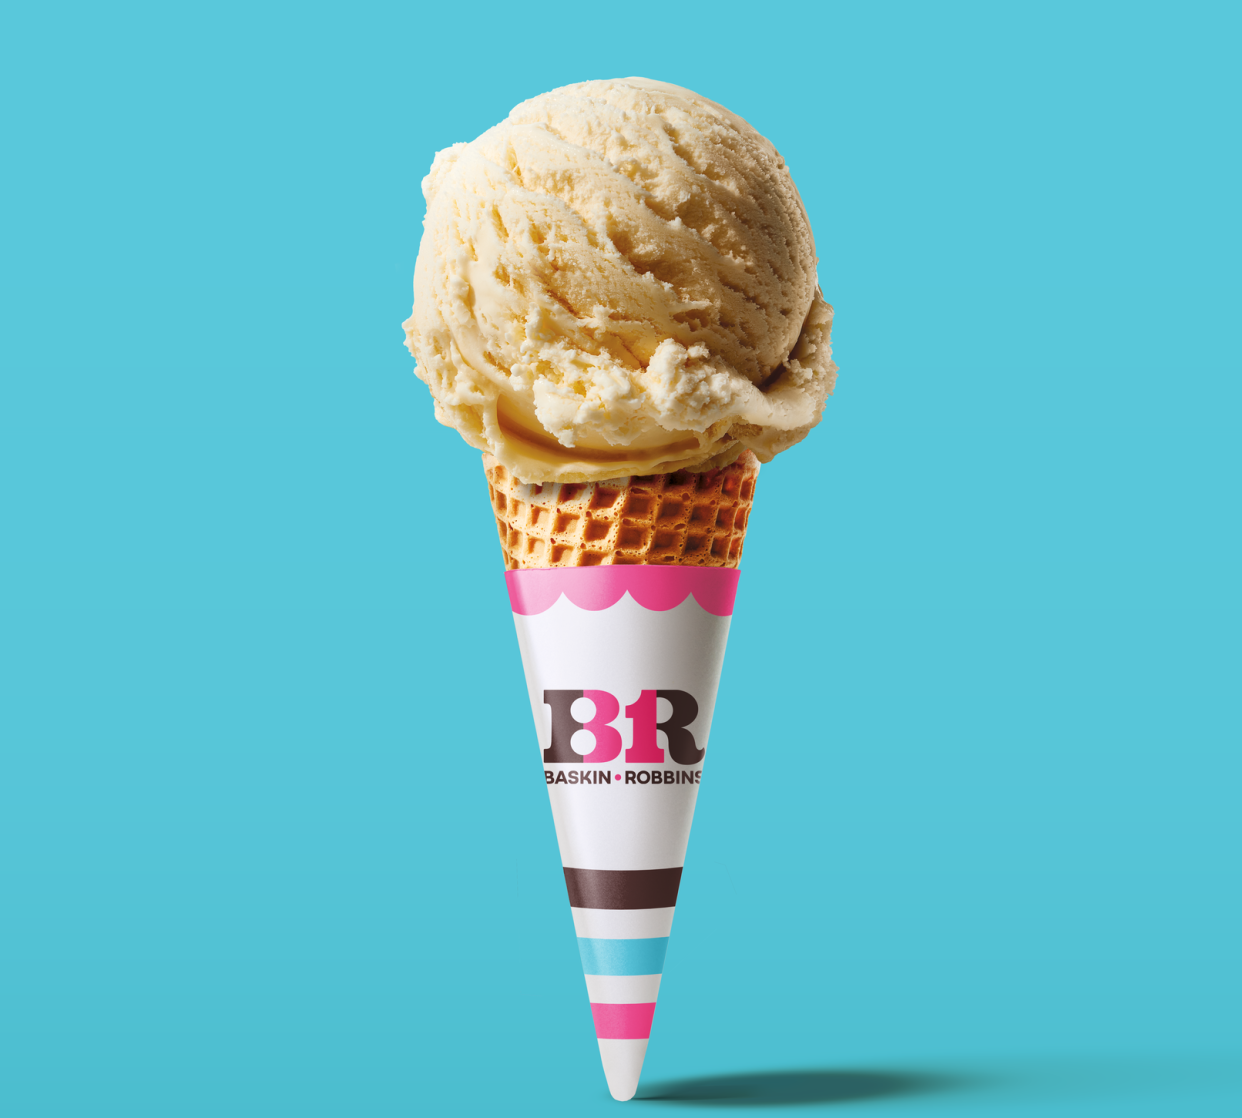 Order delivery from Baskin-Robbins through Uber Eats and save $5 on your order through Feb. 17.